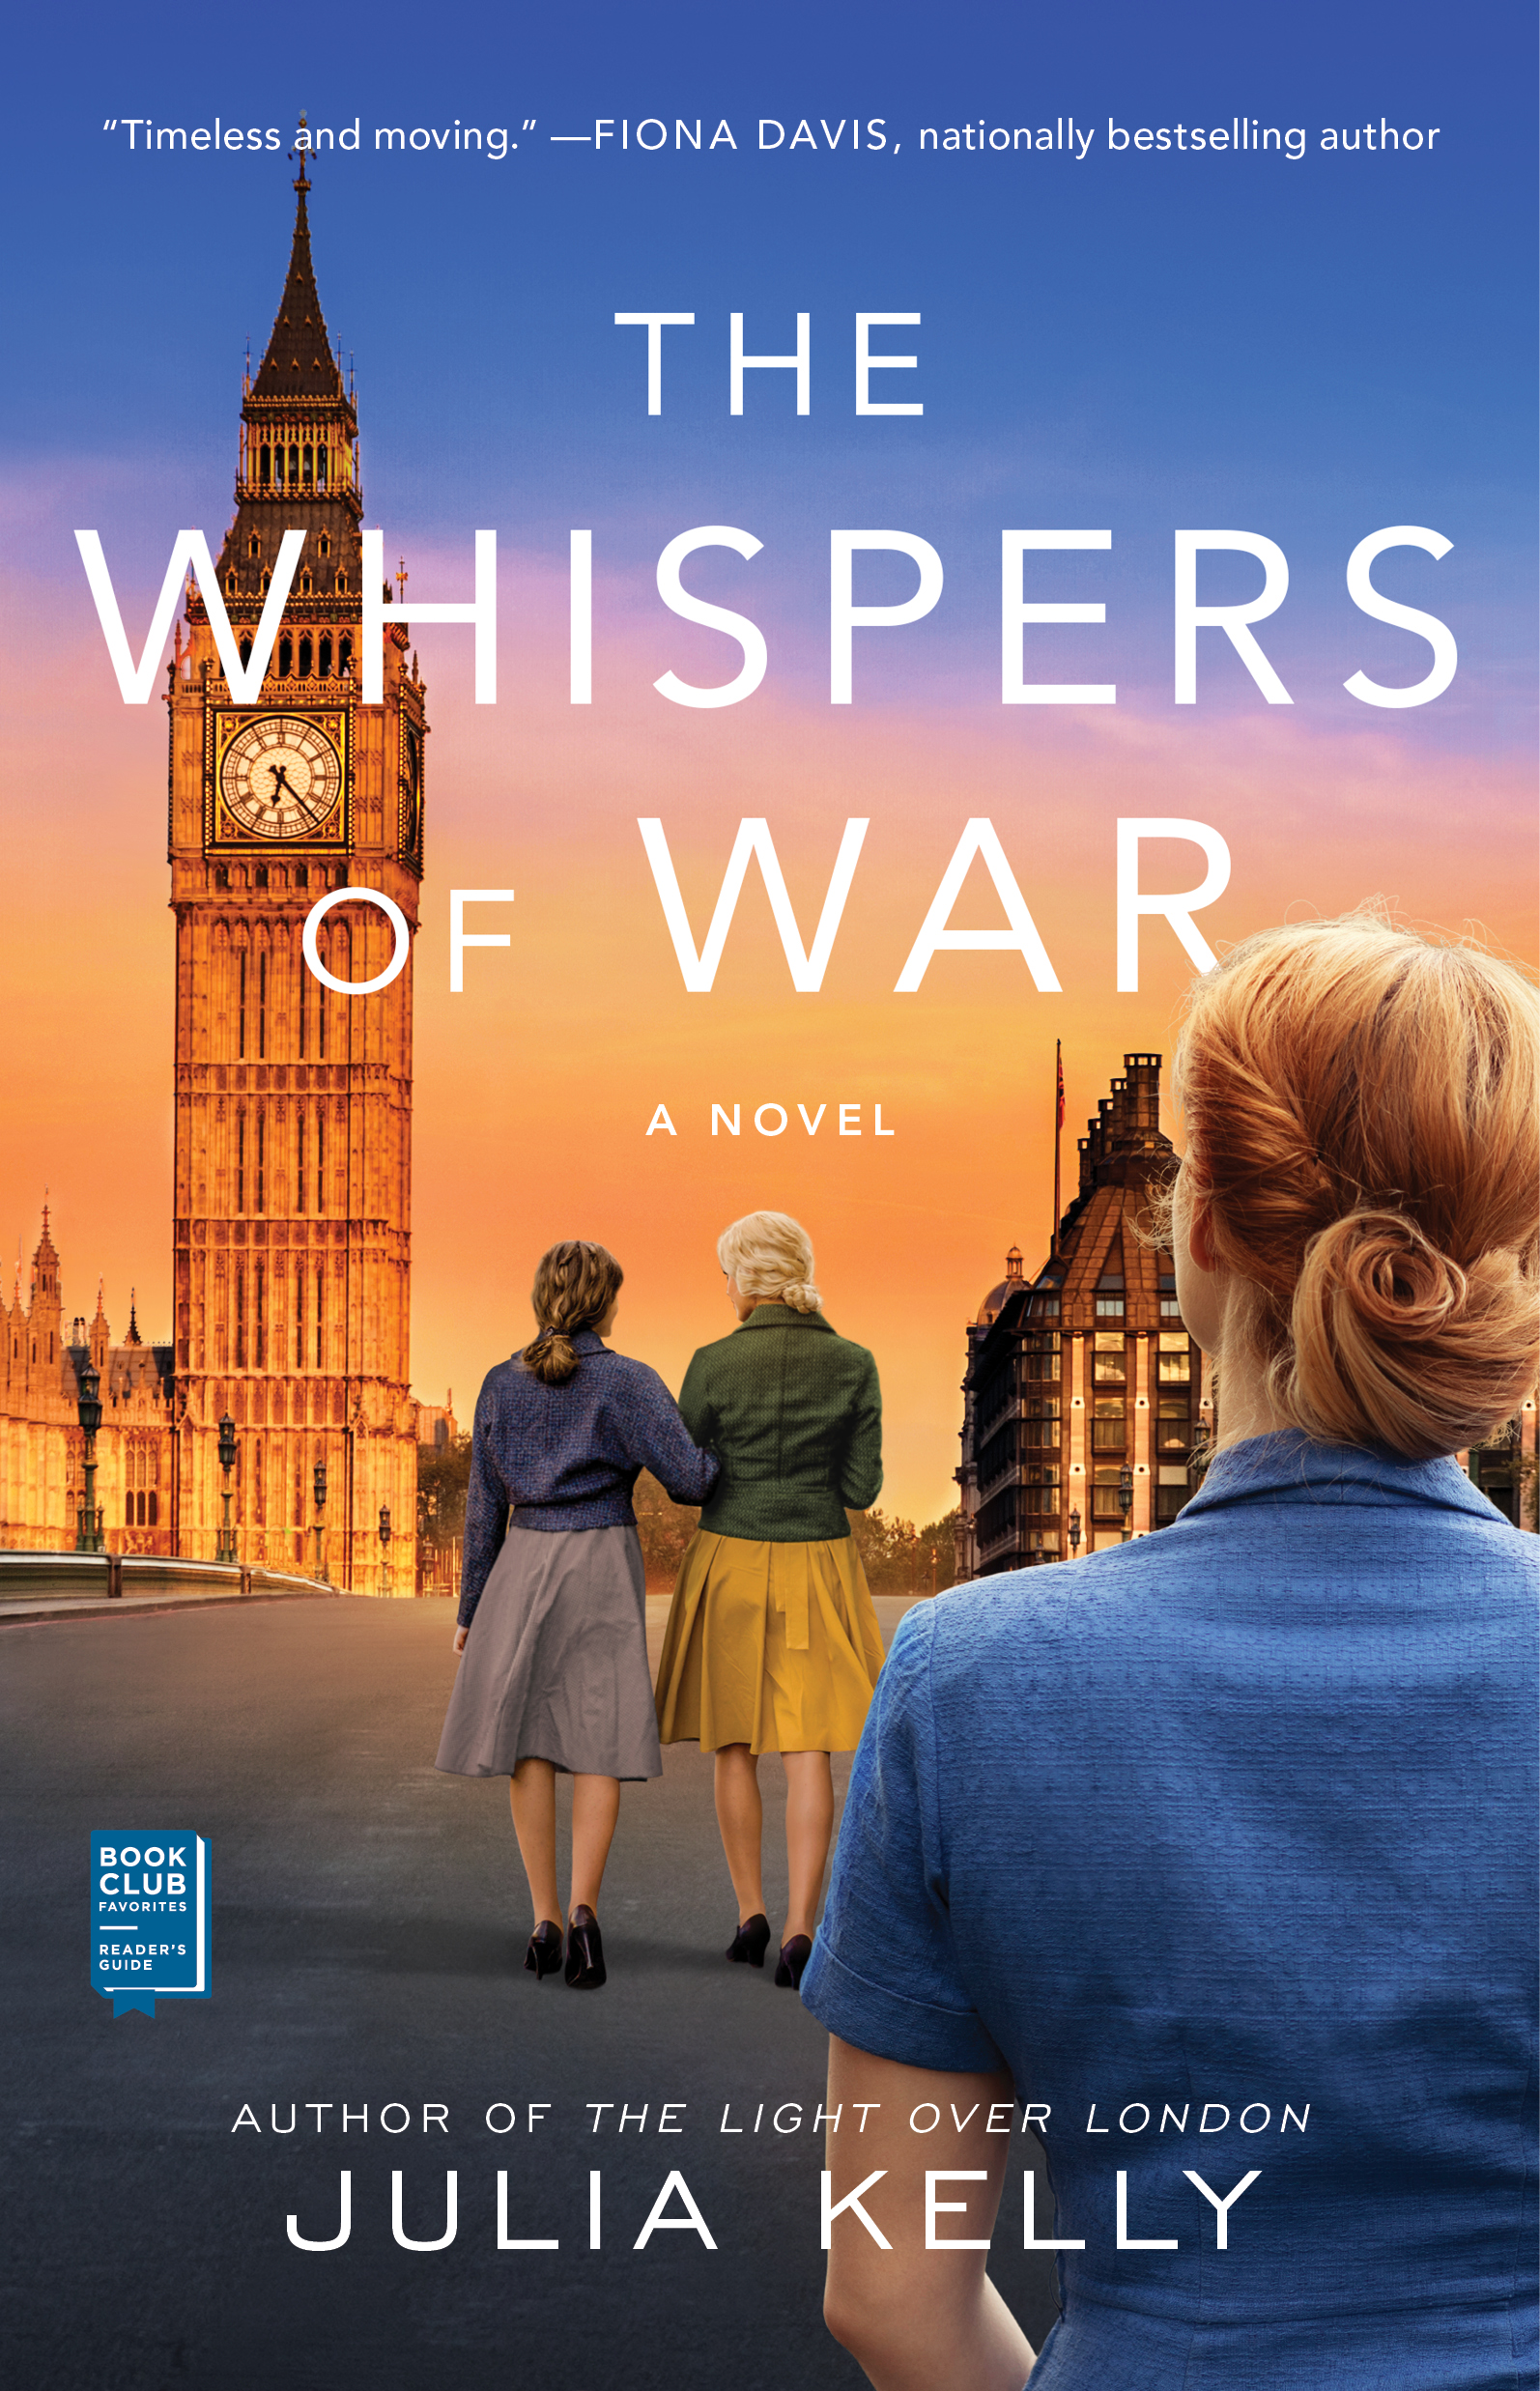 [EPUB] The Whispers of War by Julia Kelly